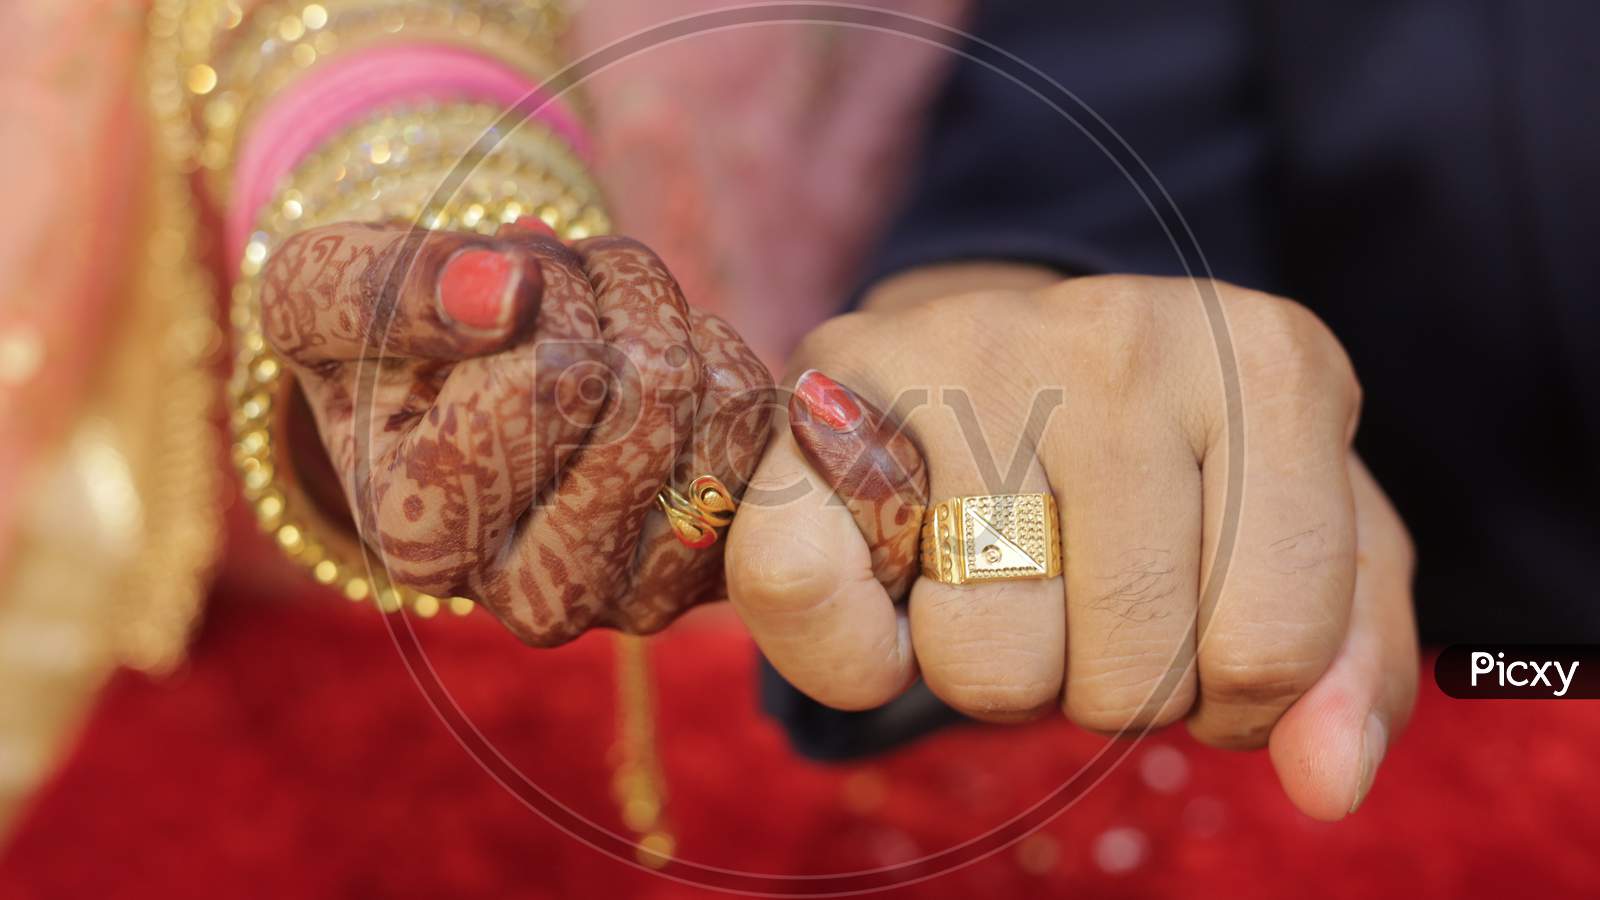 Professional Wedding Photography Service Nepal - Engagement (Ring Ceremony)  | Facebook